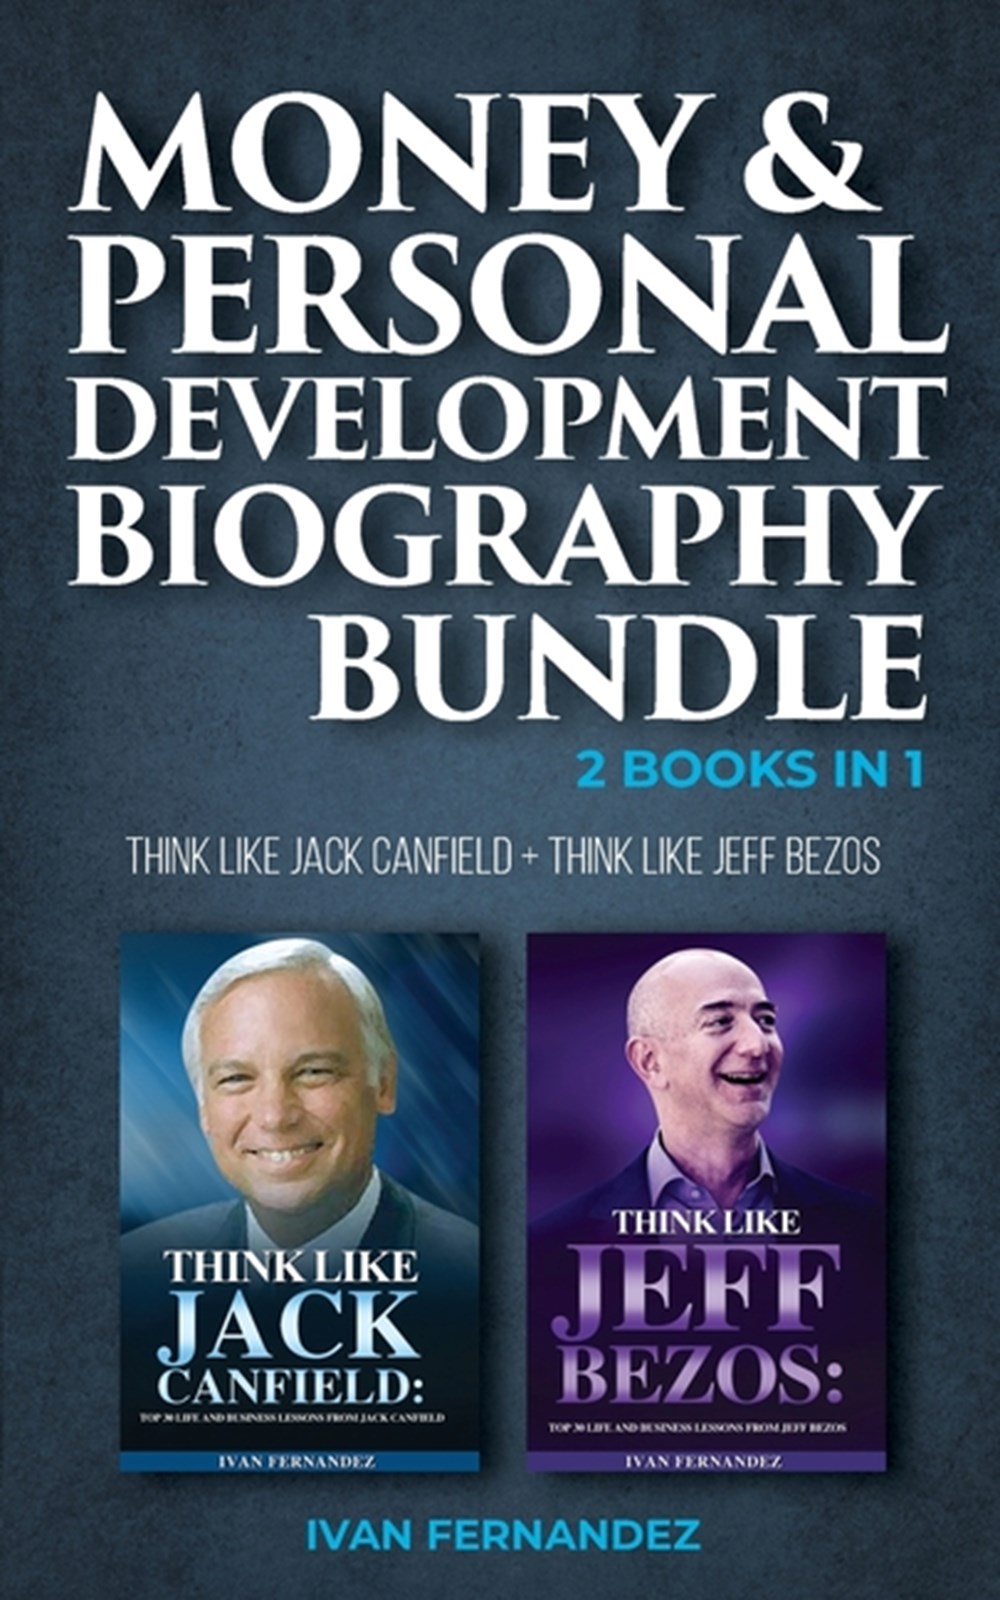 Money & Personal Development Biography Bundle 2 Books in 1: Think Like Jack Canfield + Think Like Je